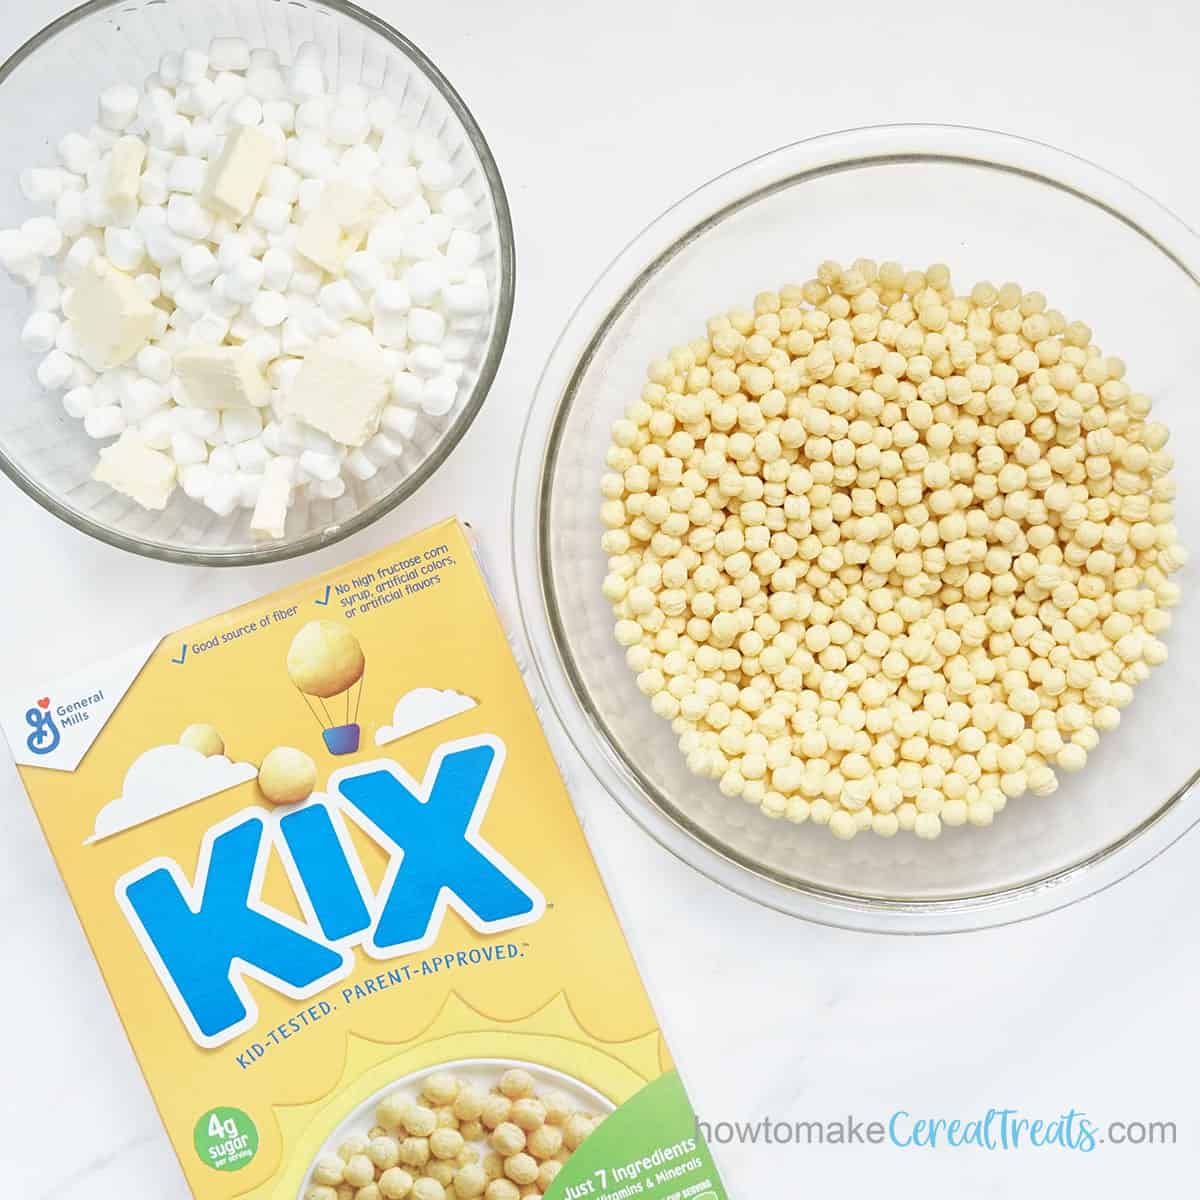 box of Kix cereal, marshmallows and butter